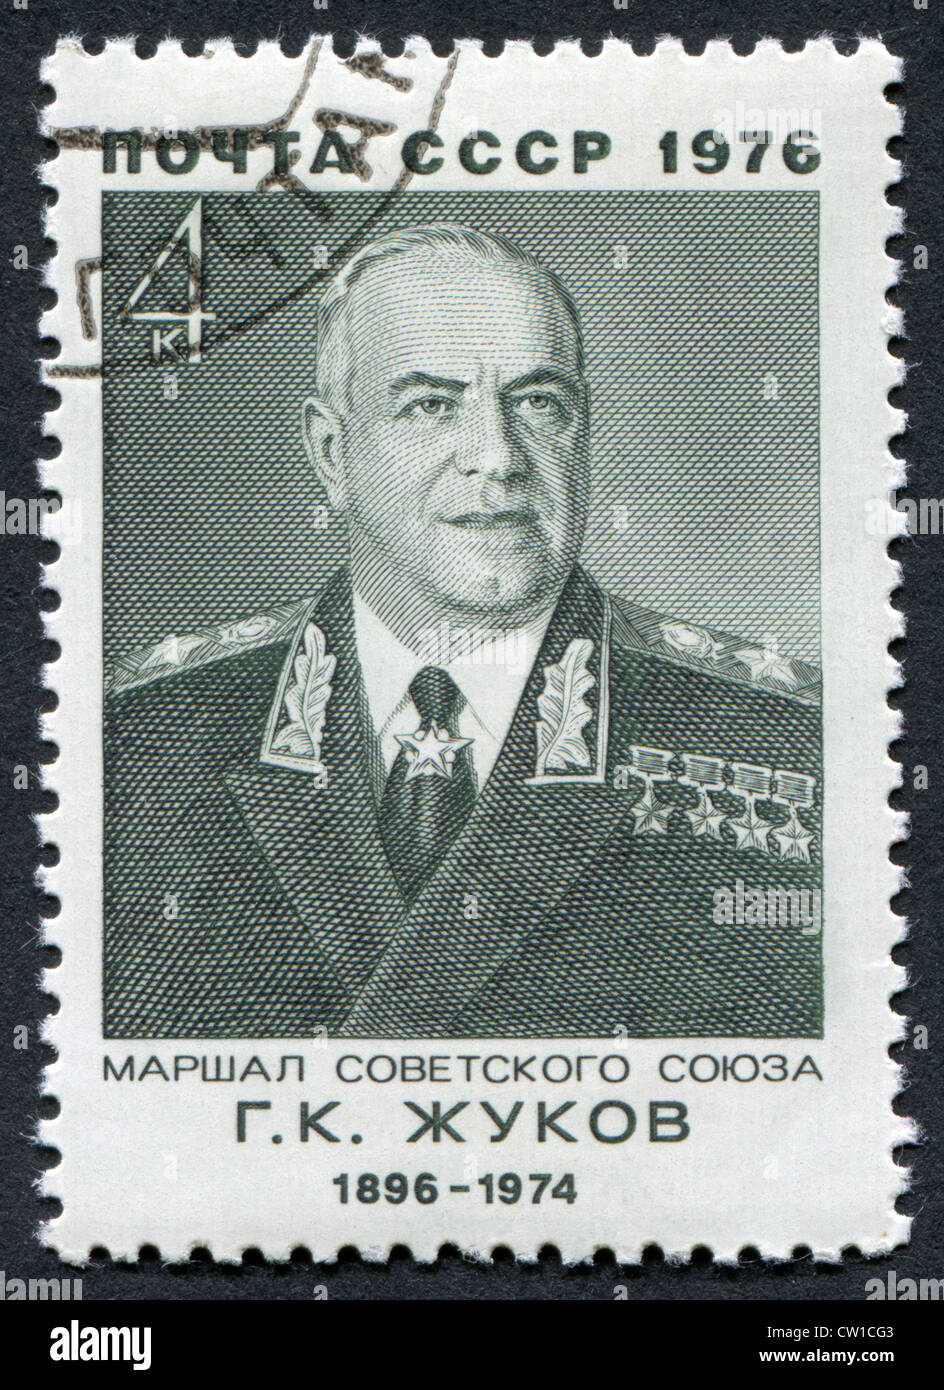 USSR - CIRCA 1976: A stamp printed in the USSR shows Marshal Georgy Zhukov, circa 1976 Stock Photo